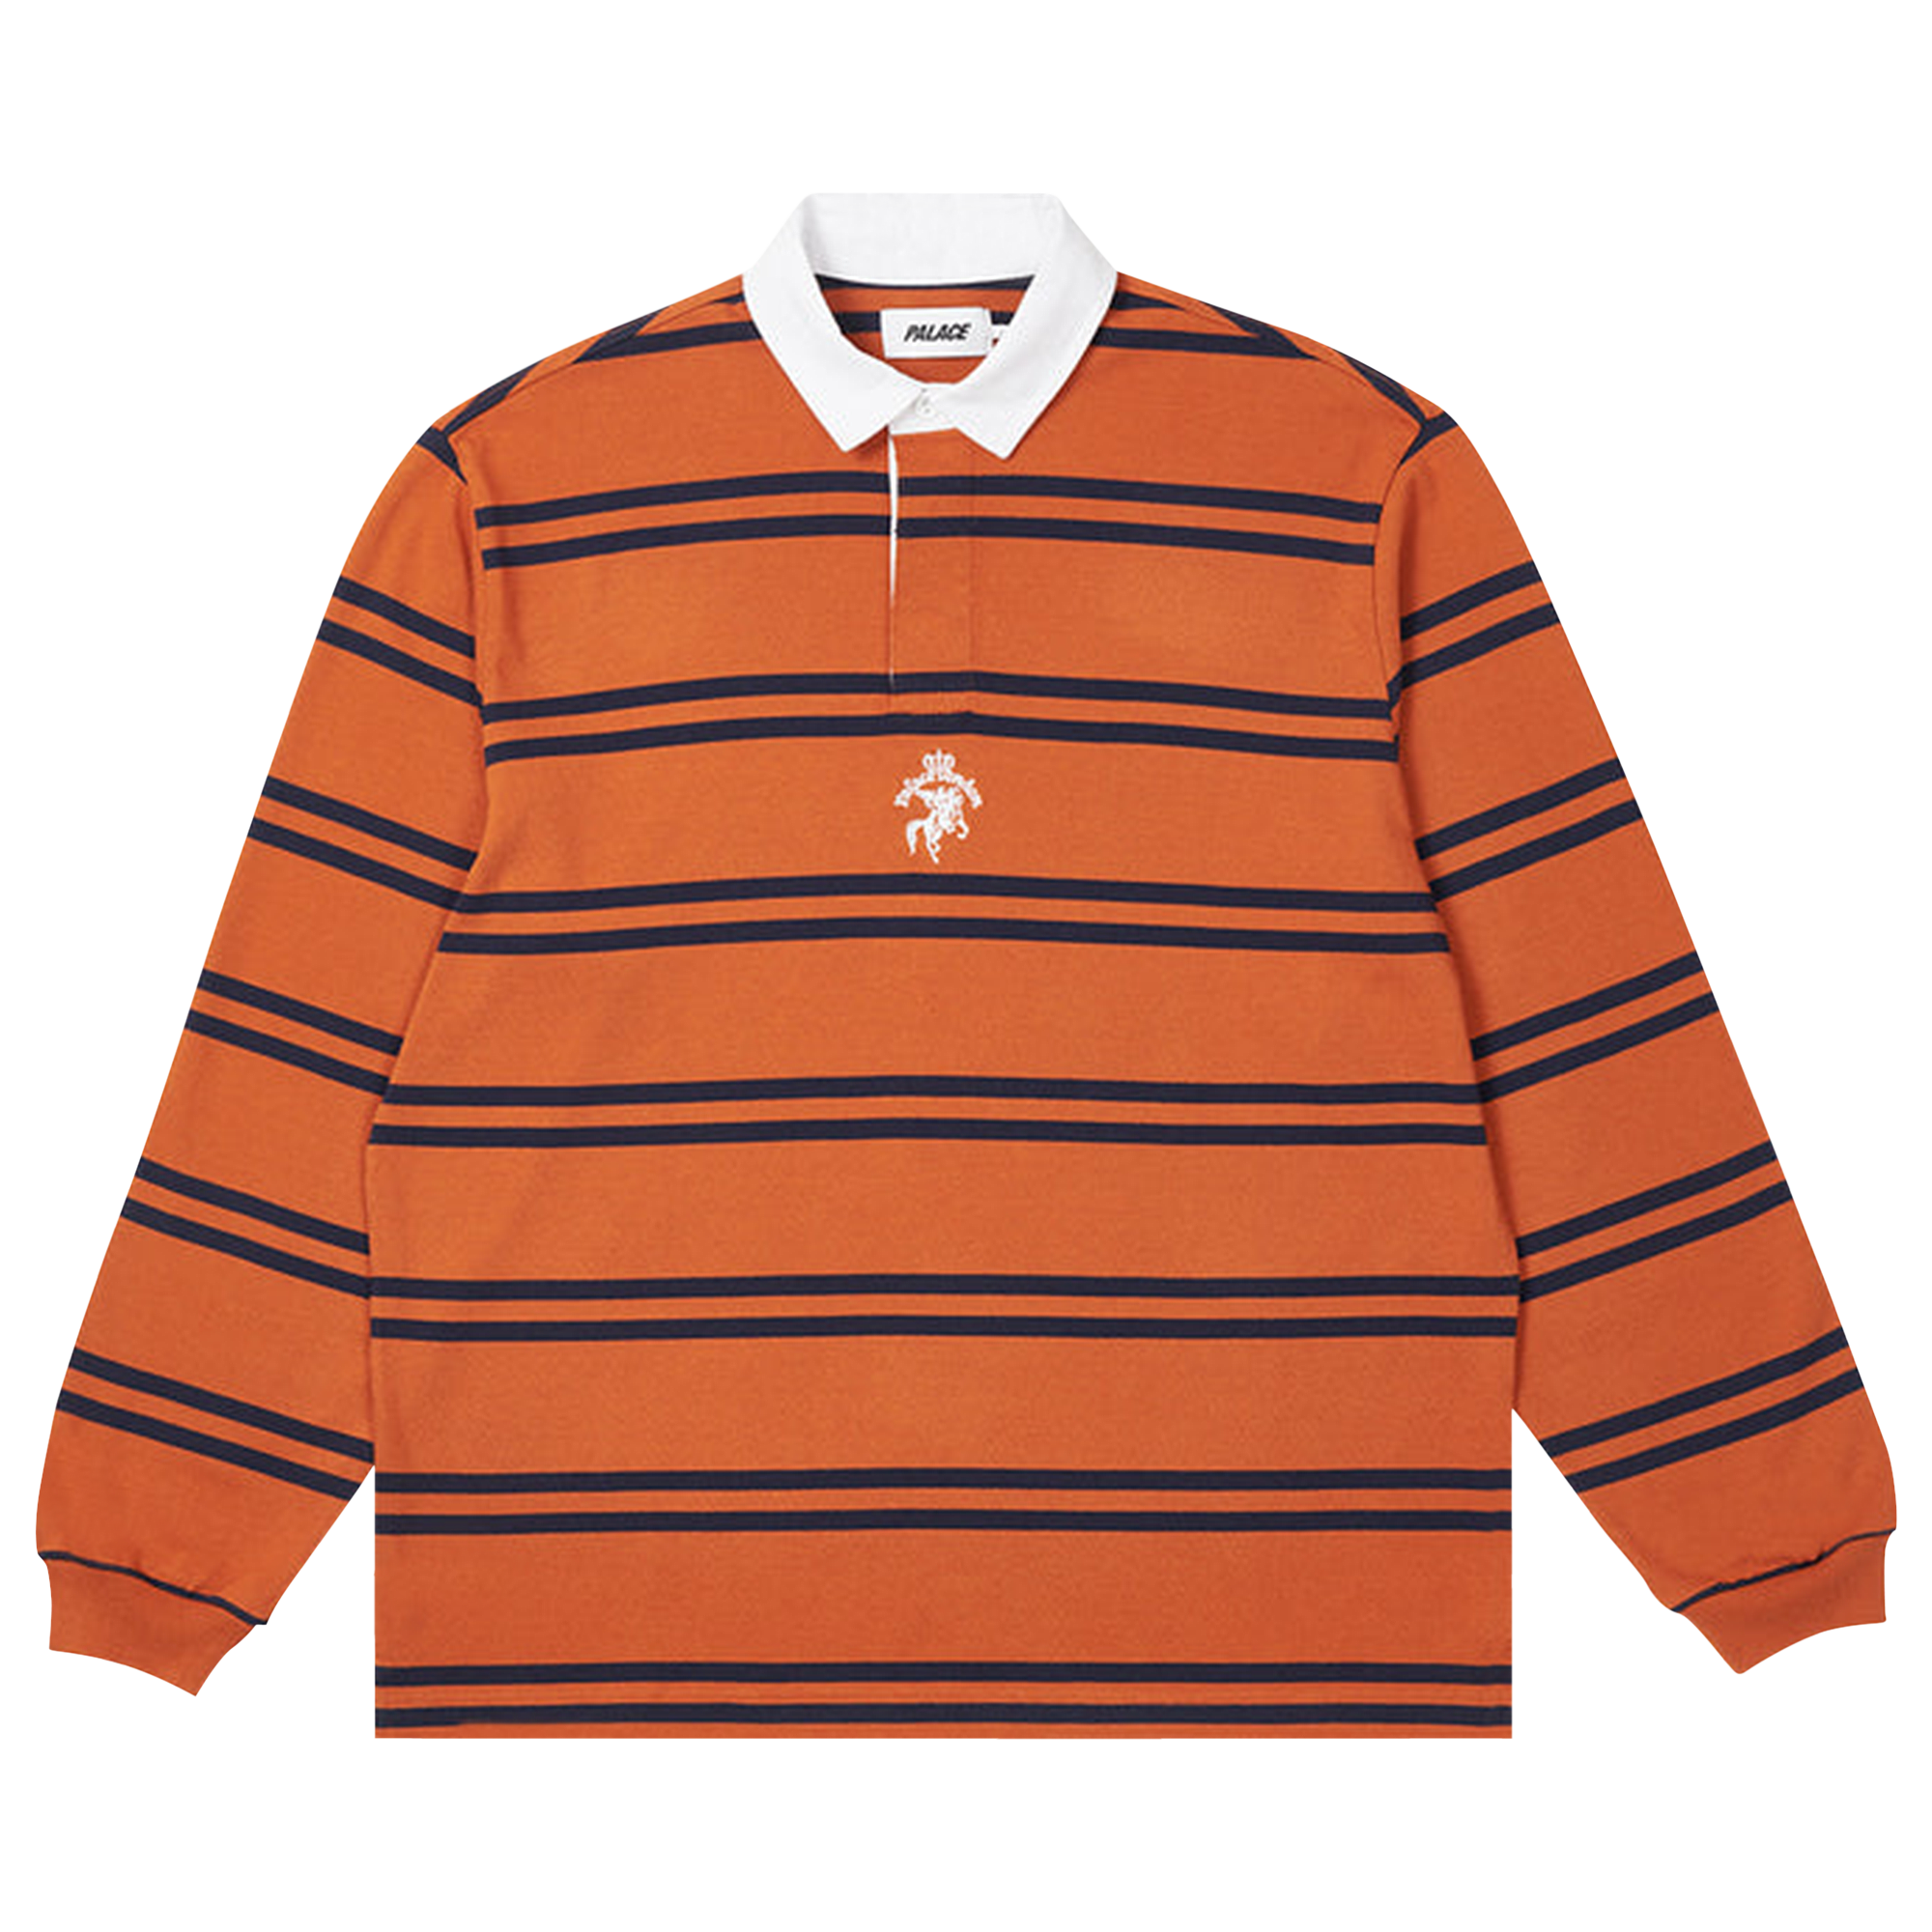 Pre-owned Palace Stripe Rugby 'orange/navy'